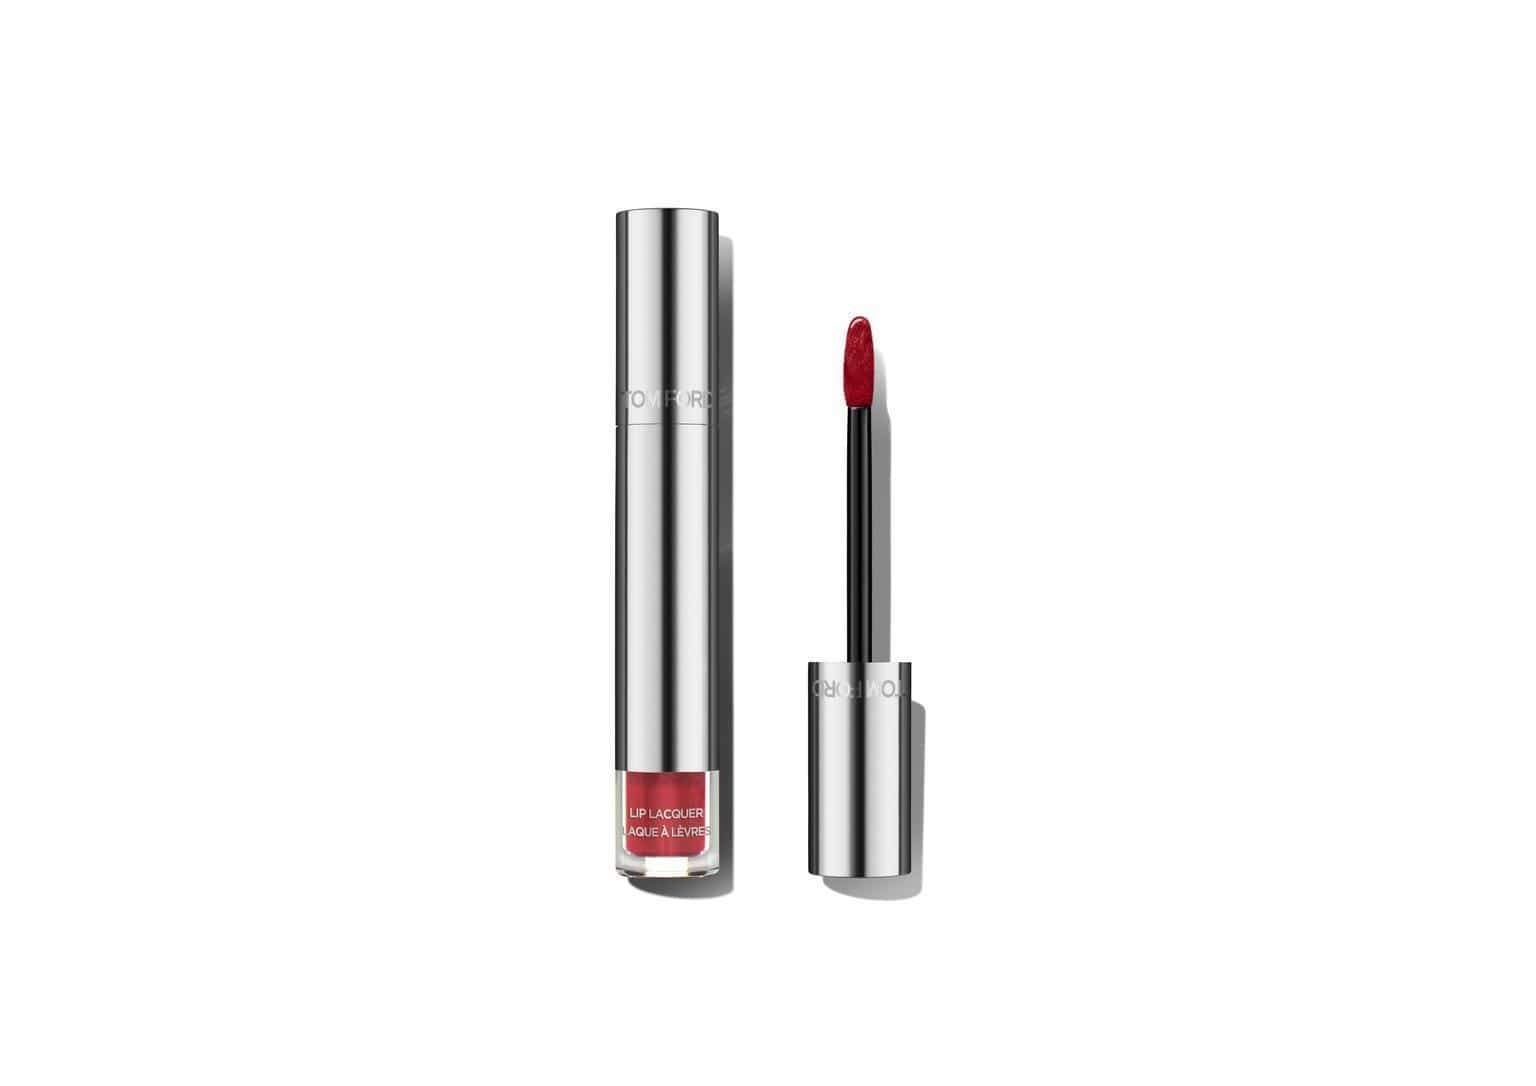 Tom Ford Lip Lacquer Extreme - Tfx32 Hot Rod, lip gloss, London Loves Beauty